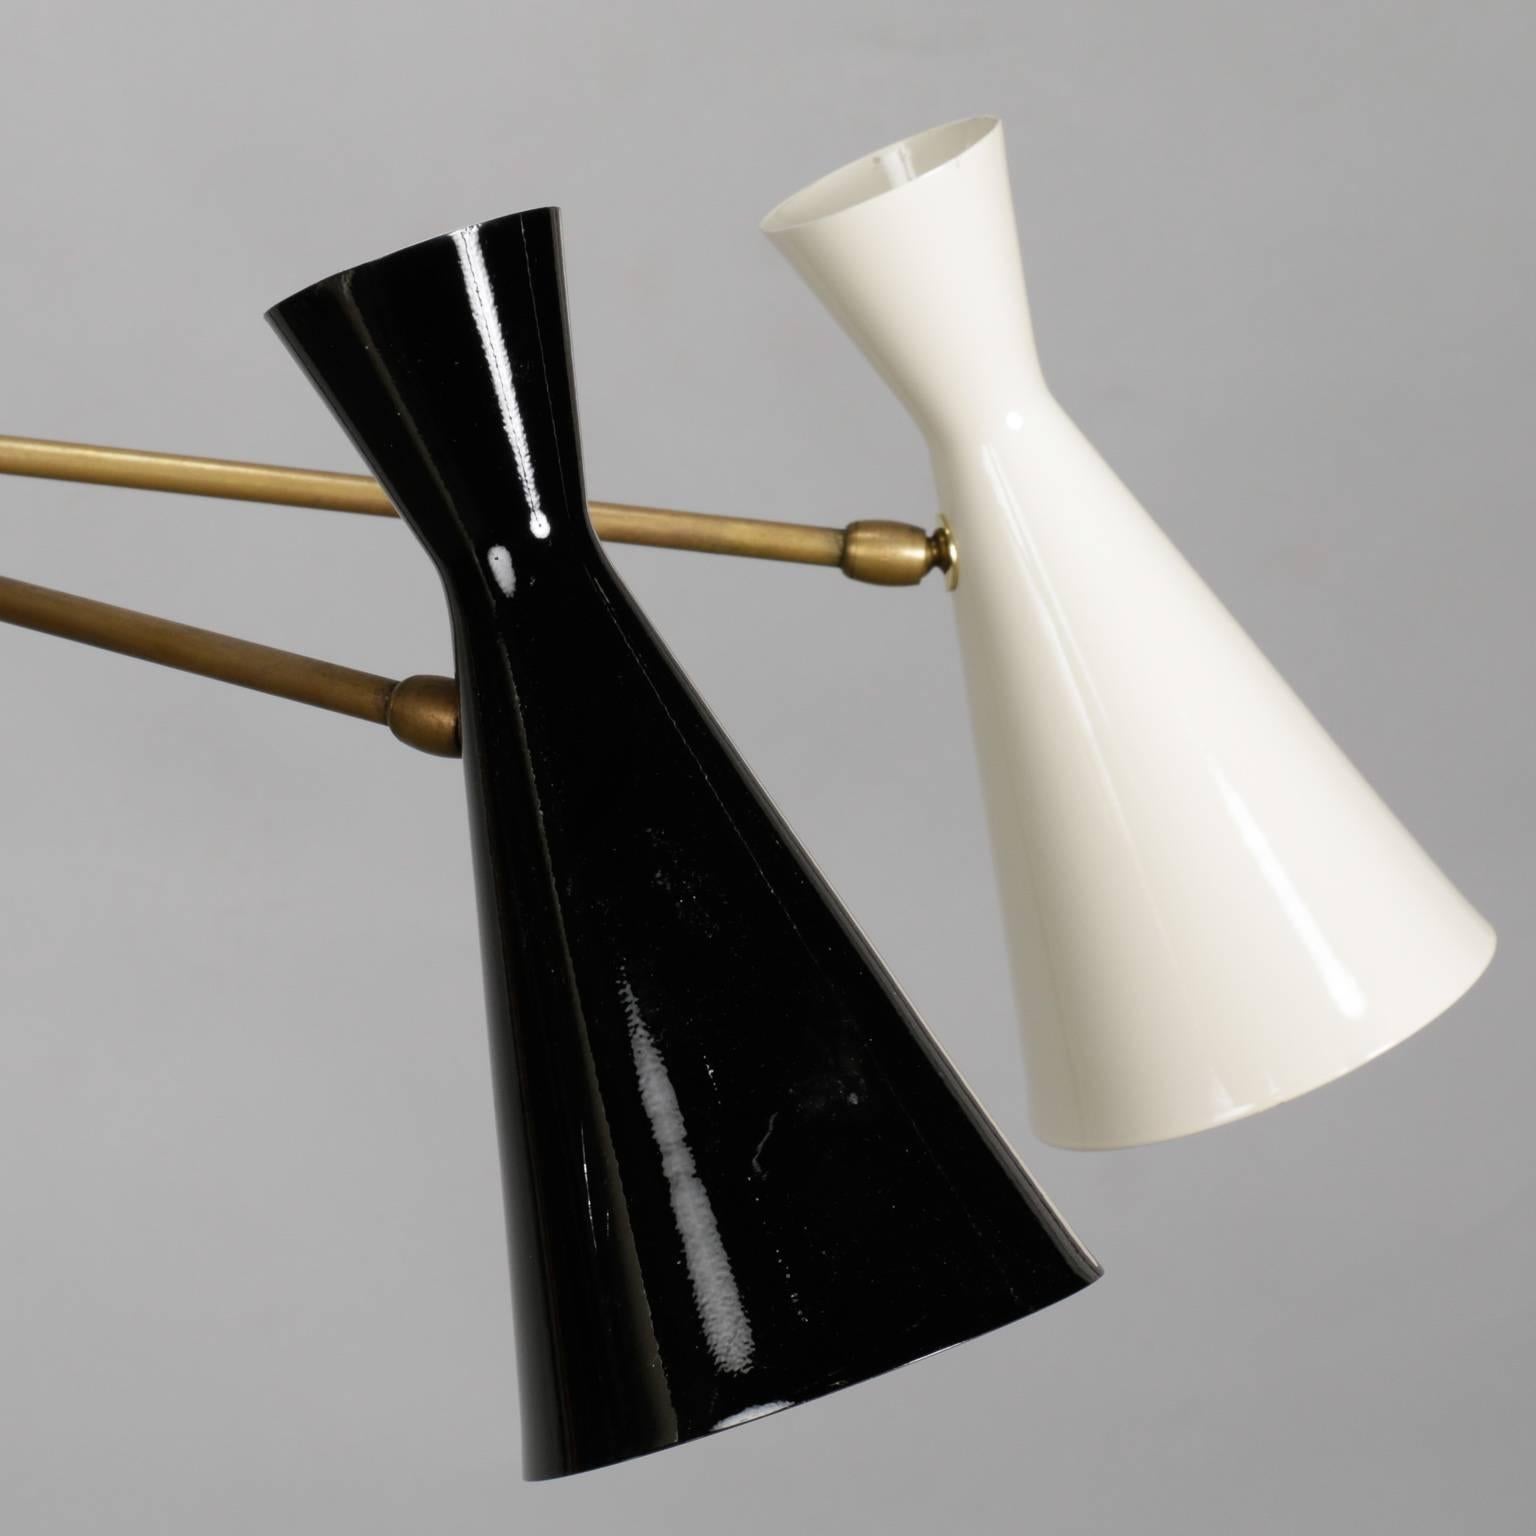 Modern black and ivory enameled metal and brass Italian hanging light fixture in style of Stilnovo, circa 1950s. Asymmetrical with three single cones on brass arm and larger double cone with one up light and one down light. Five candelabra style